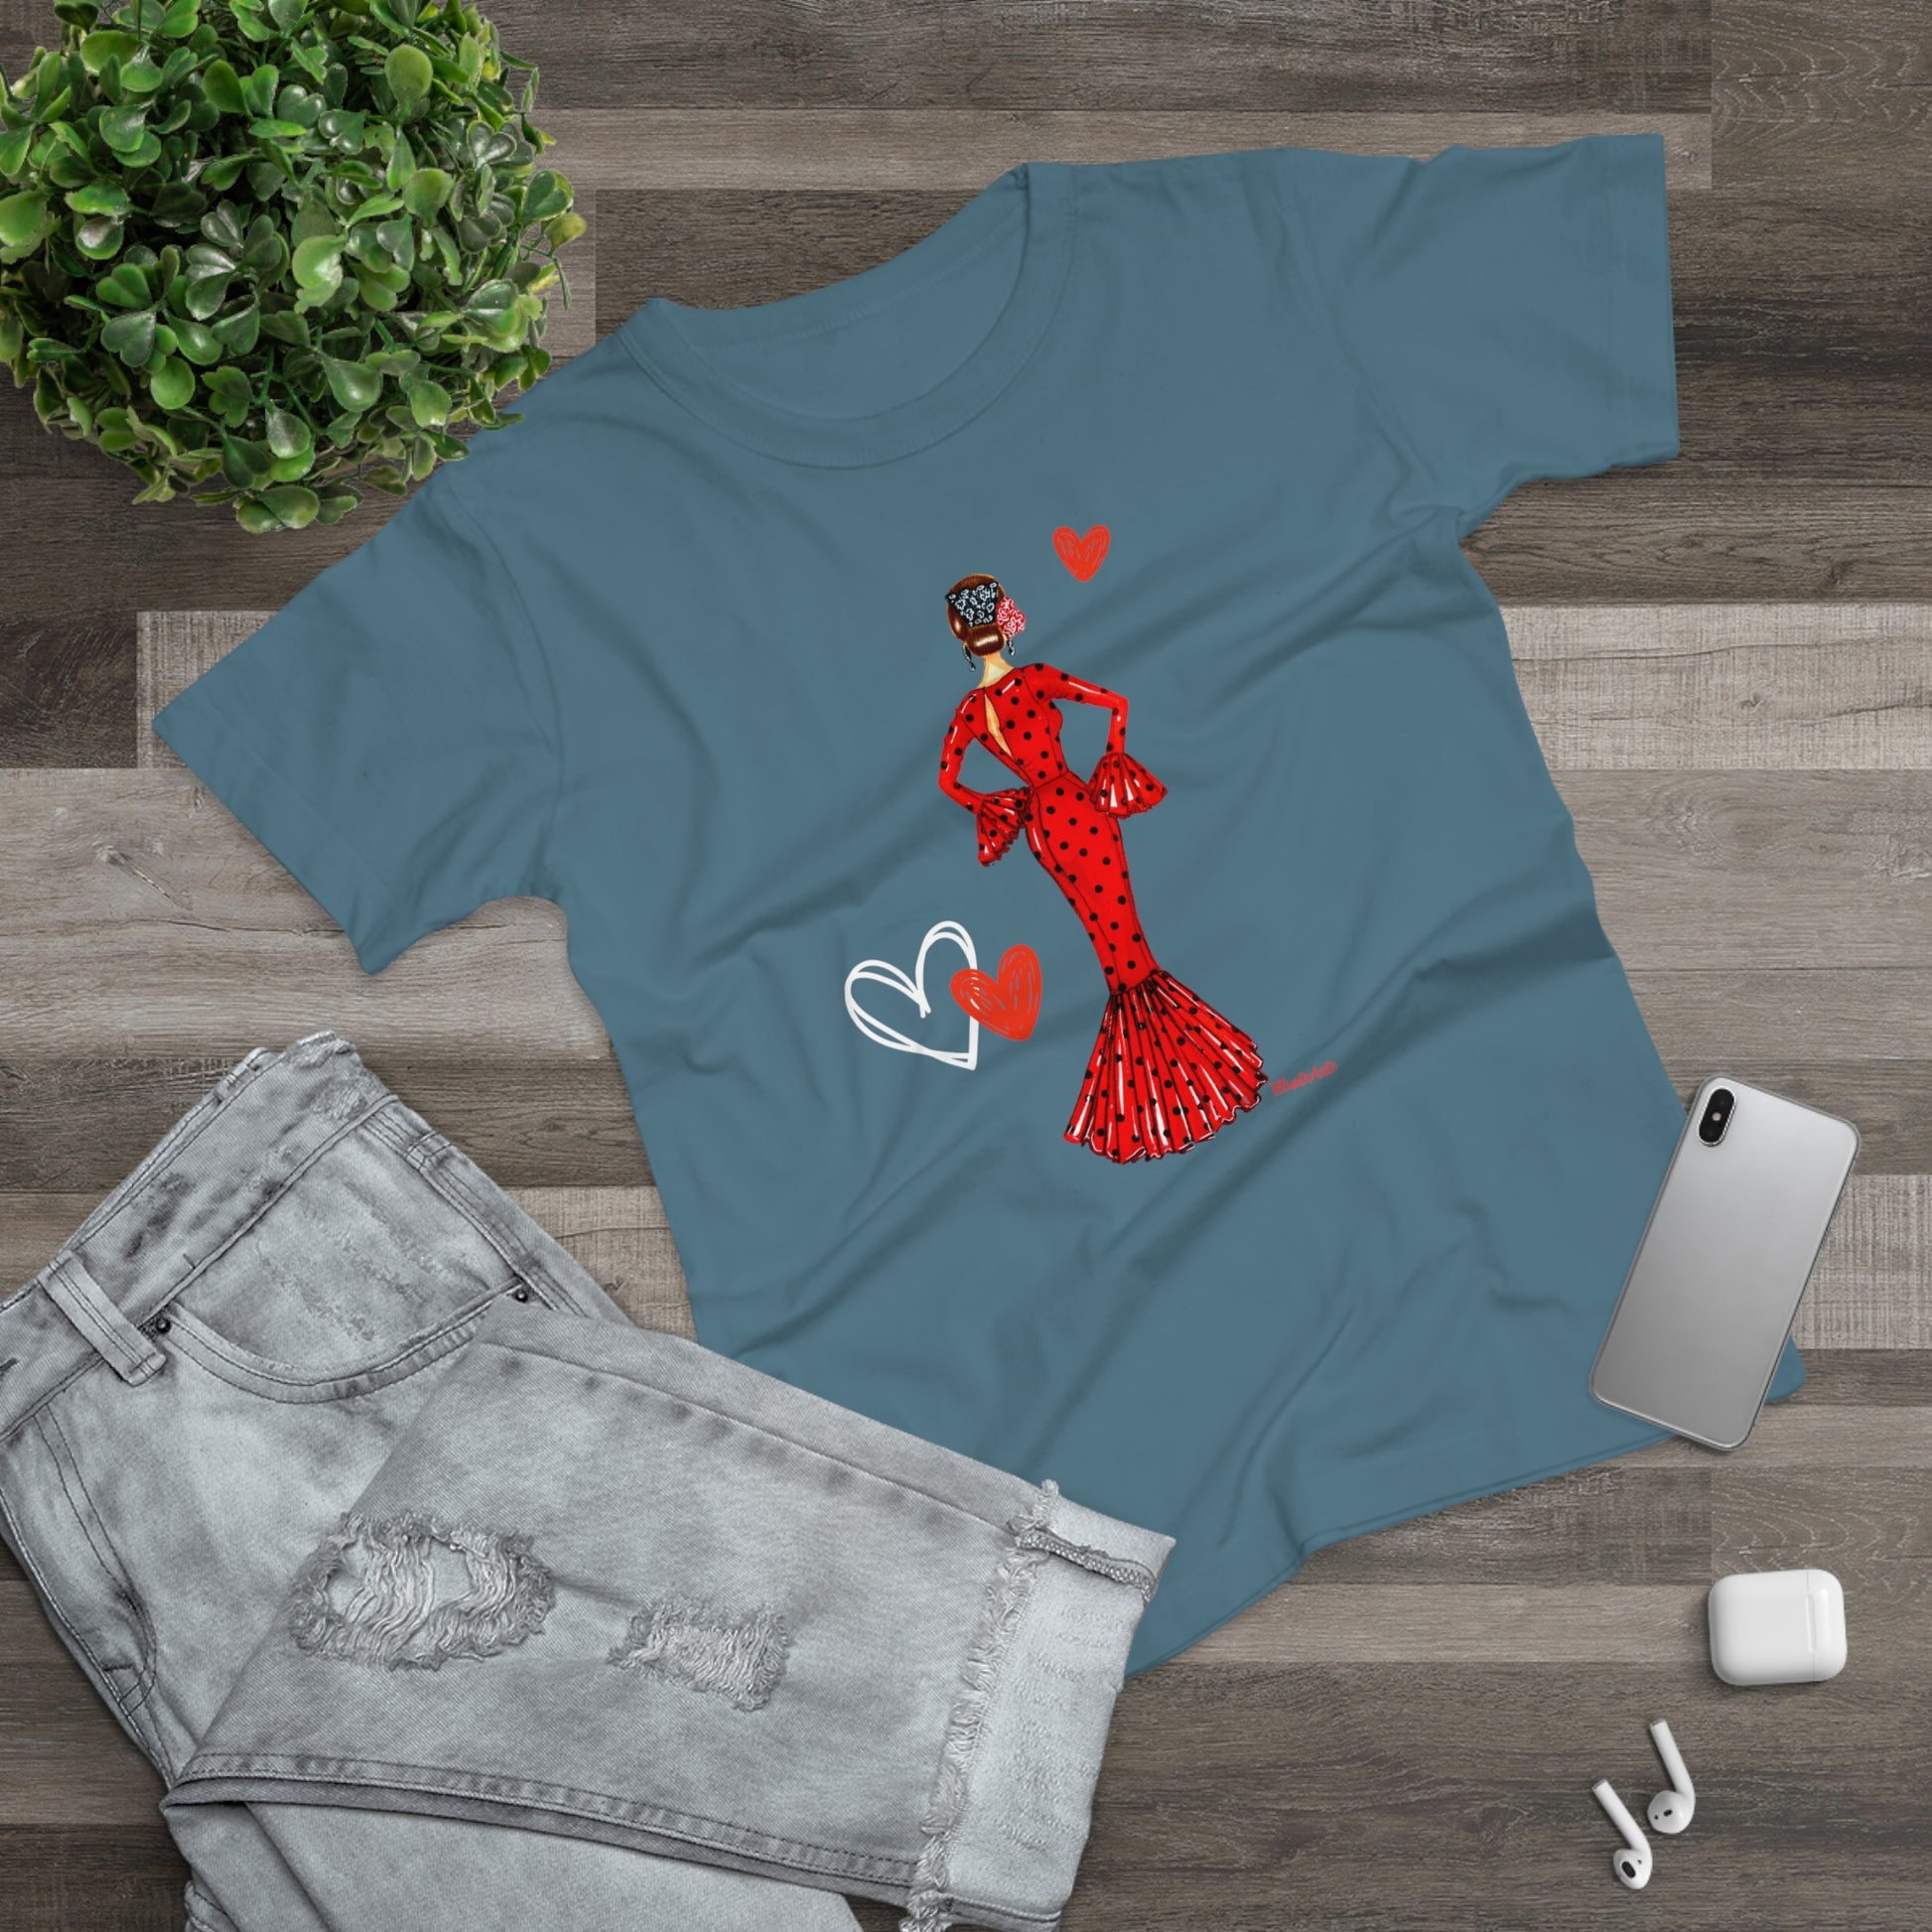 a t - shirt with a picture of a woman in a red dress